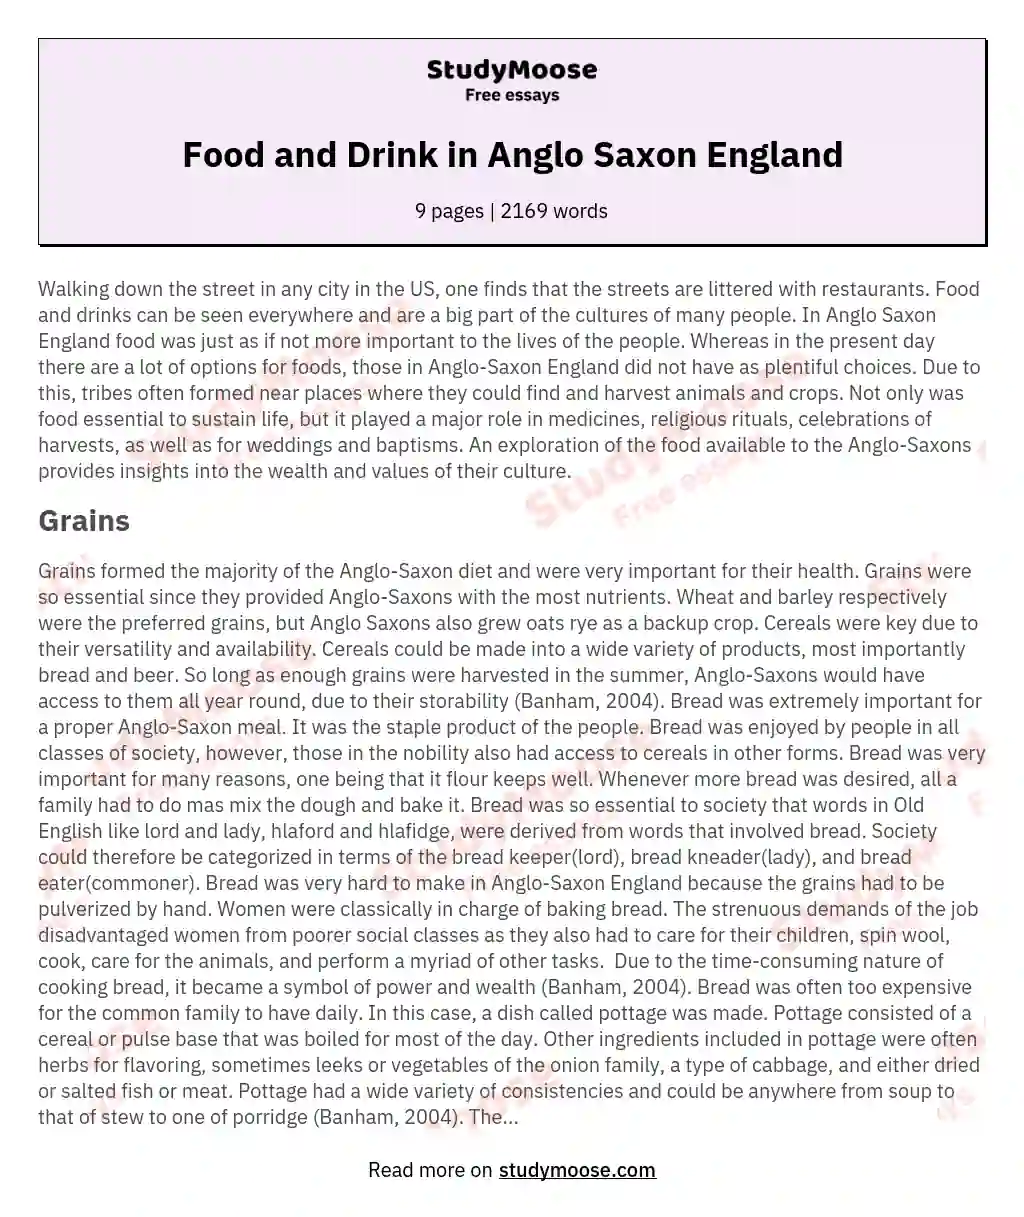 Food and Drink in Anglo Saxon England essay